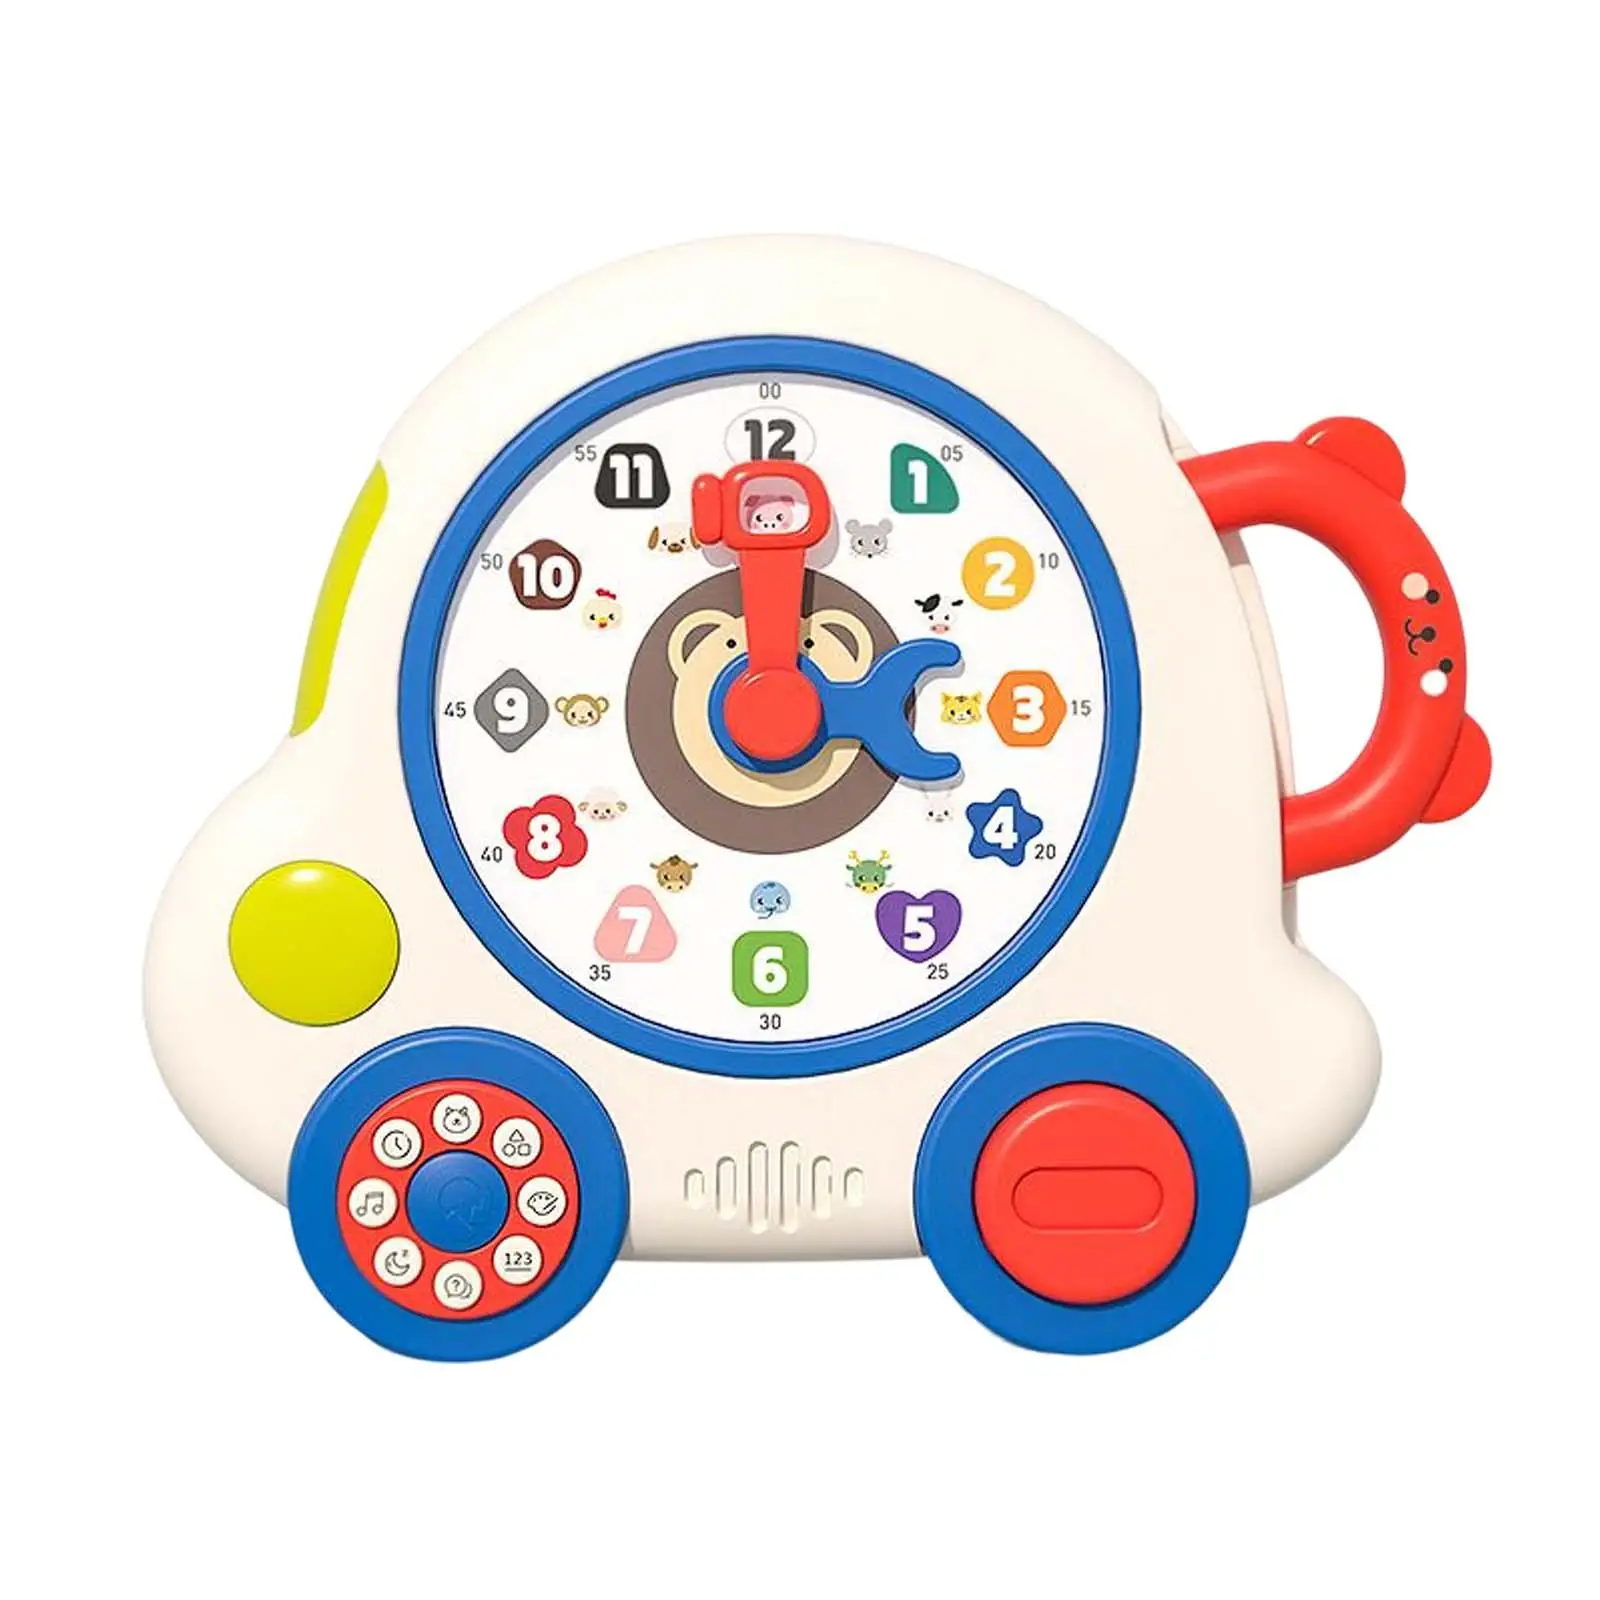 Kids Learning Machine Educational Portable for Preschool Babies 18 Month+